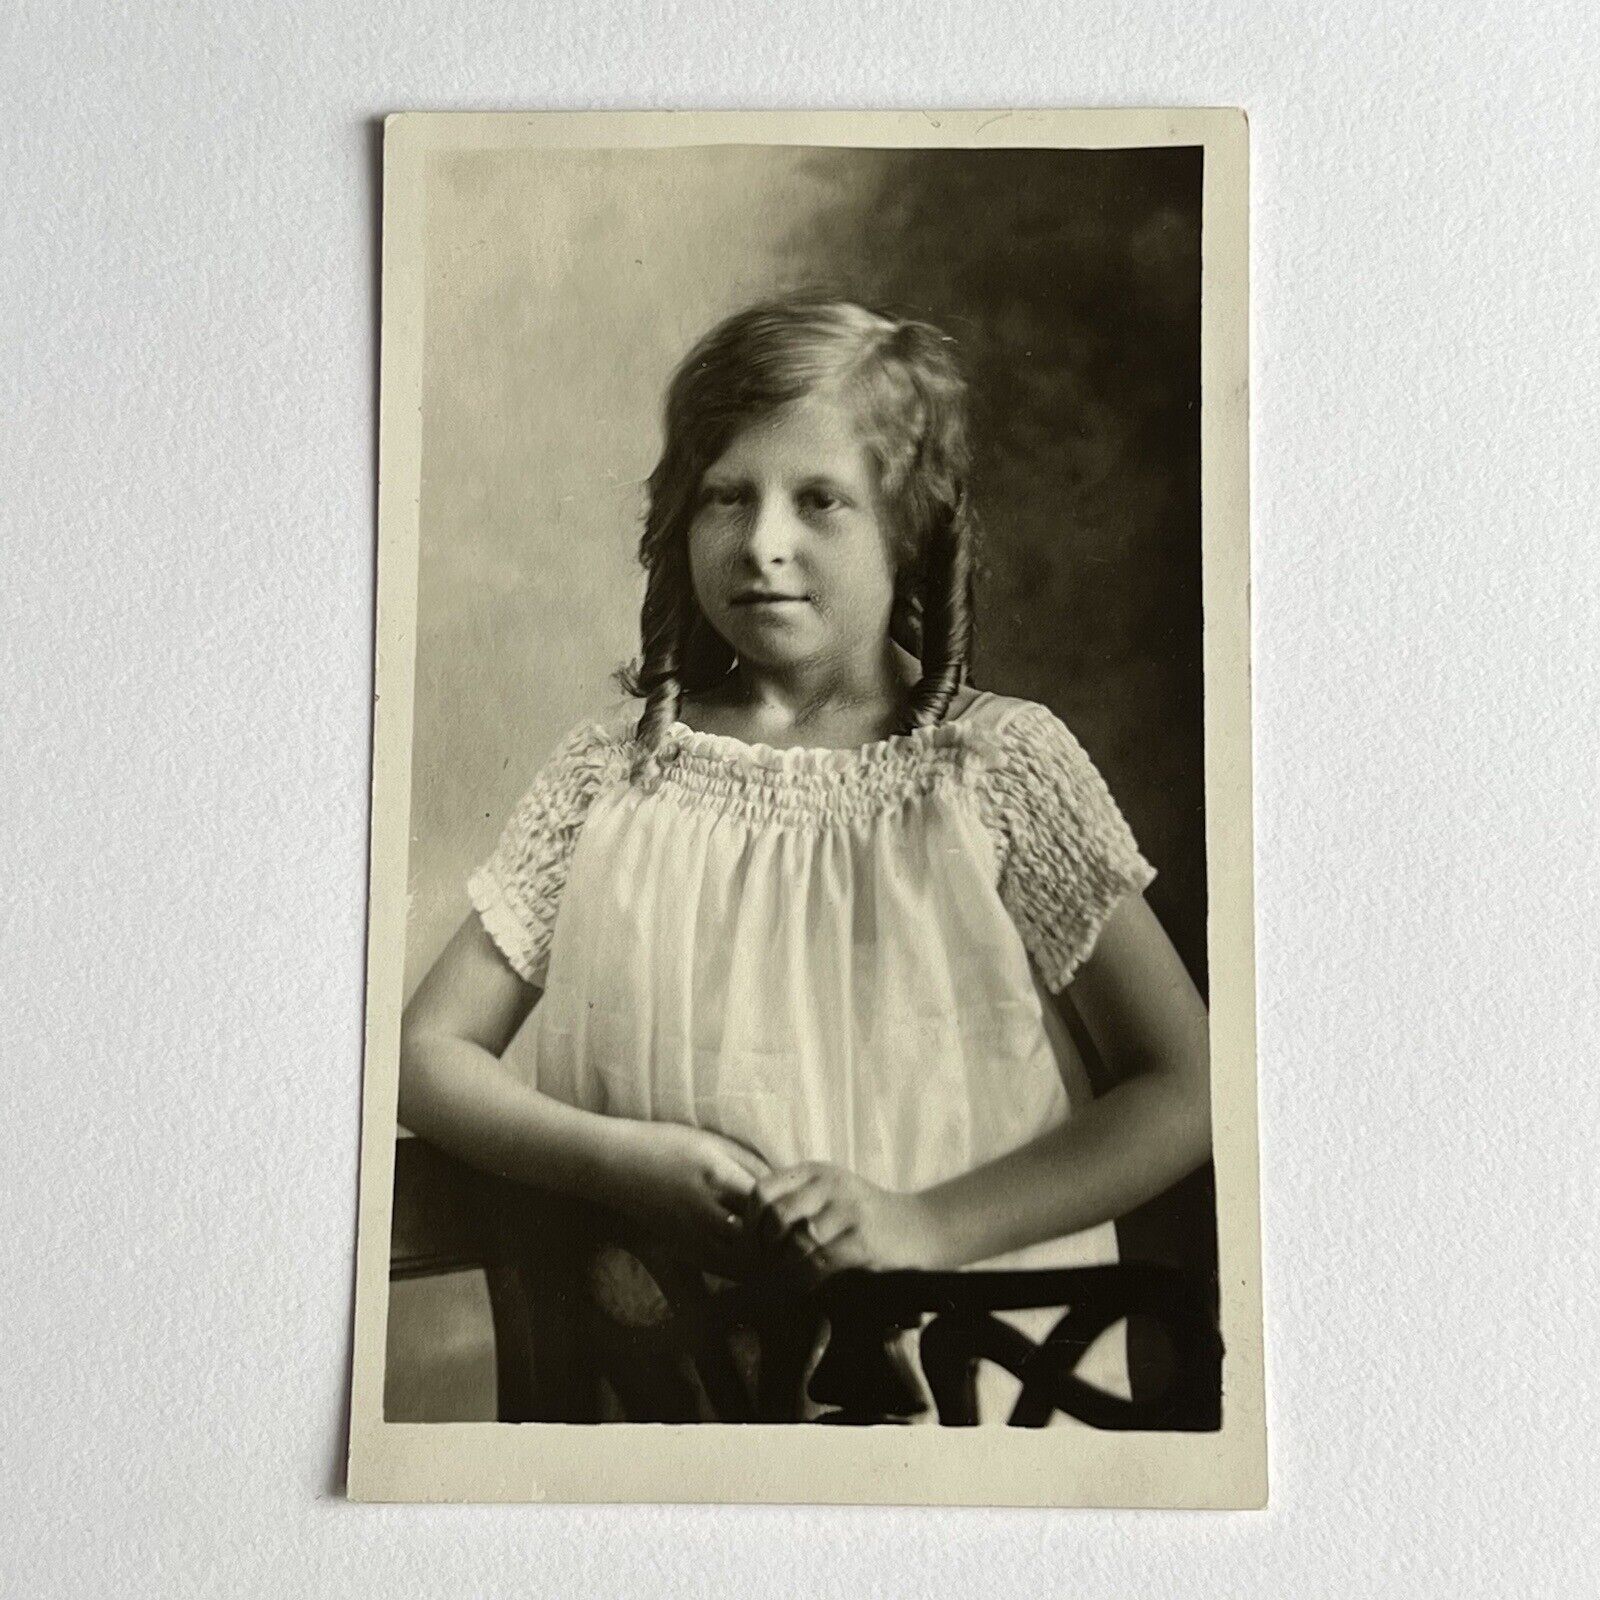 Antique RPPC Photograph Postcard Adorable Sweet Little Girl Curled Hair